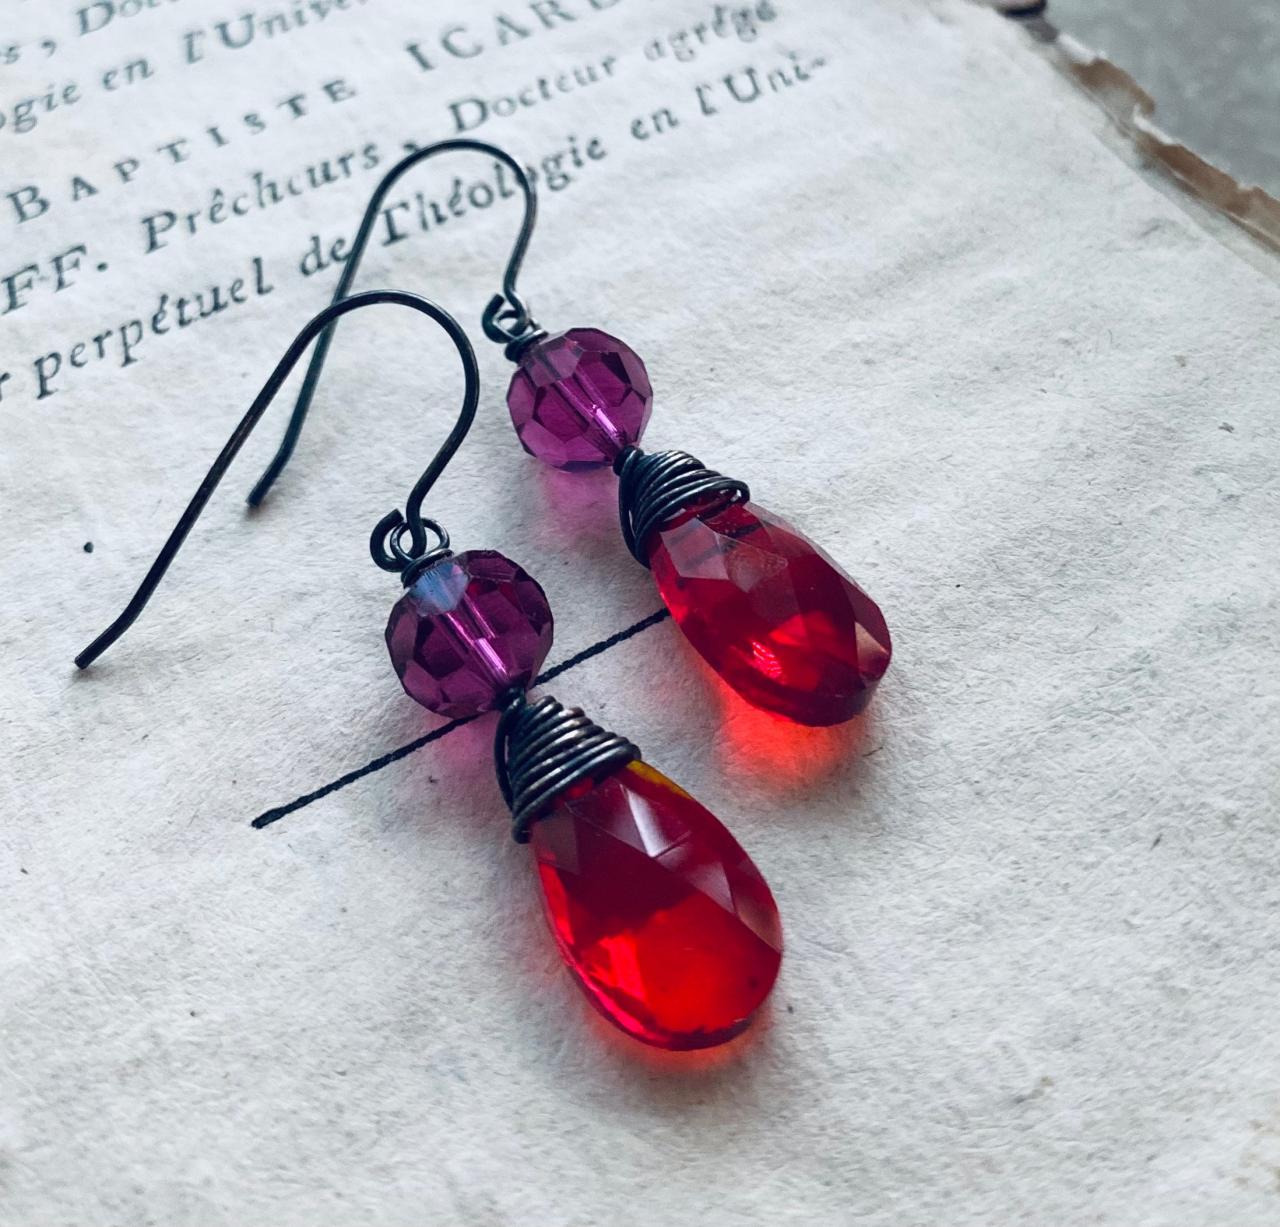 Holiday Crystal Earrings Red Fuchsia Oxidized Sterling Silver Long Drops Vintage Style Wire Wrapped.